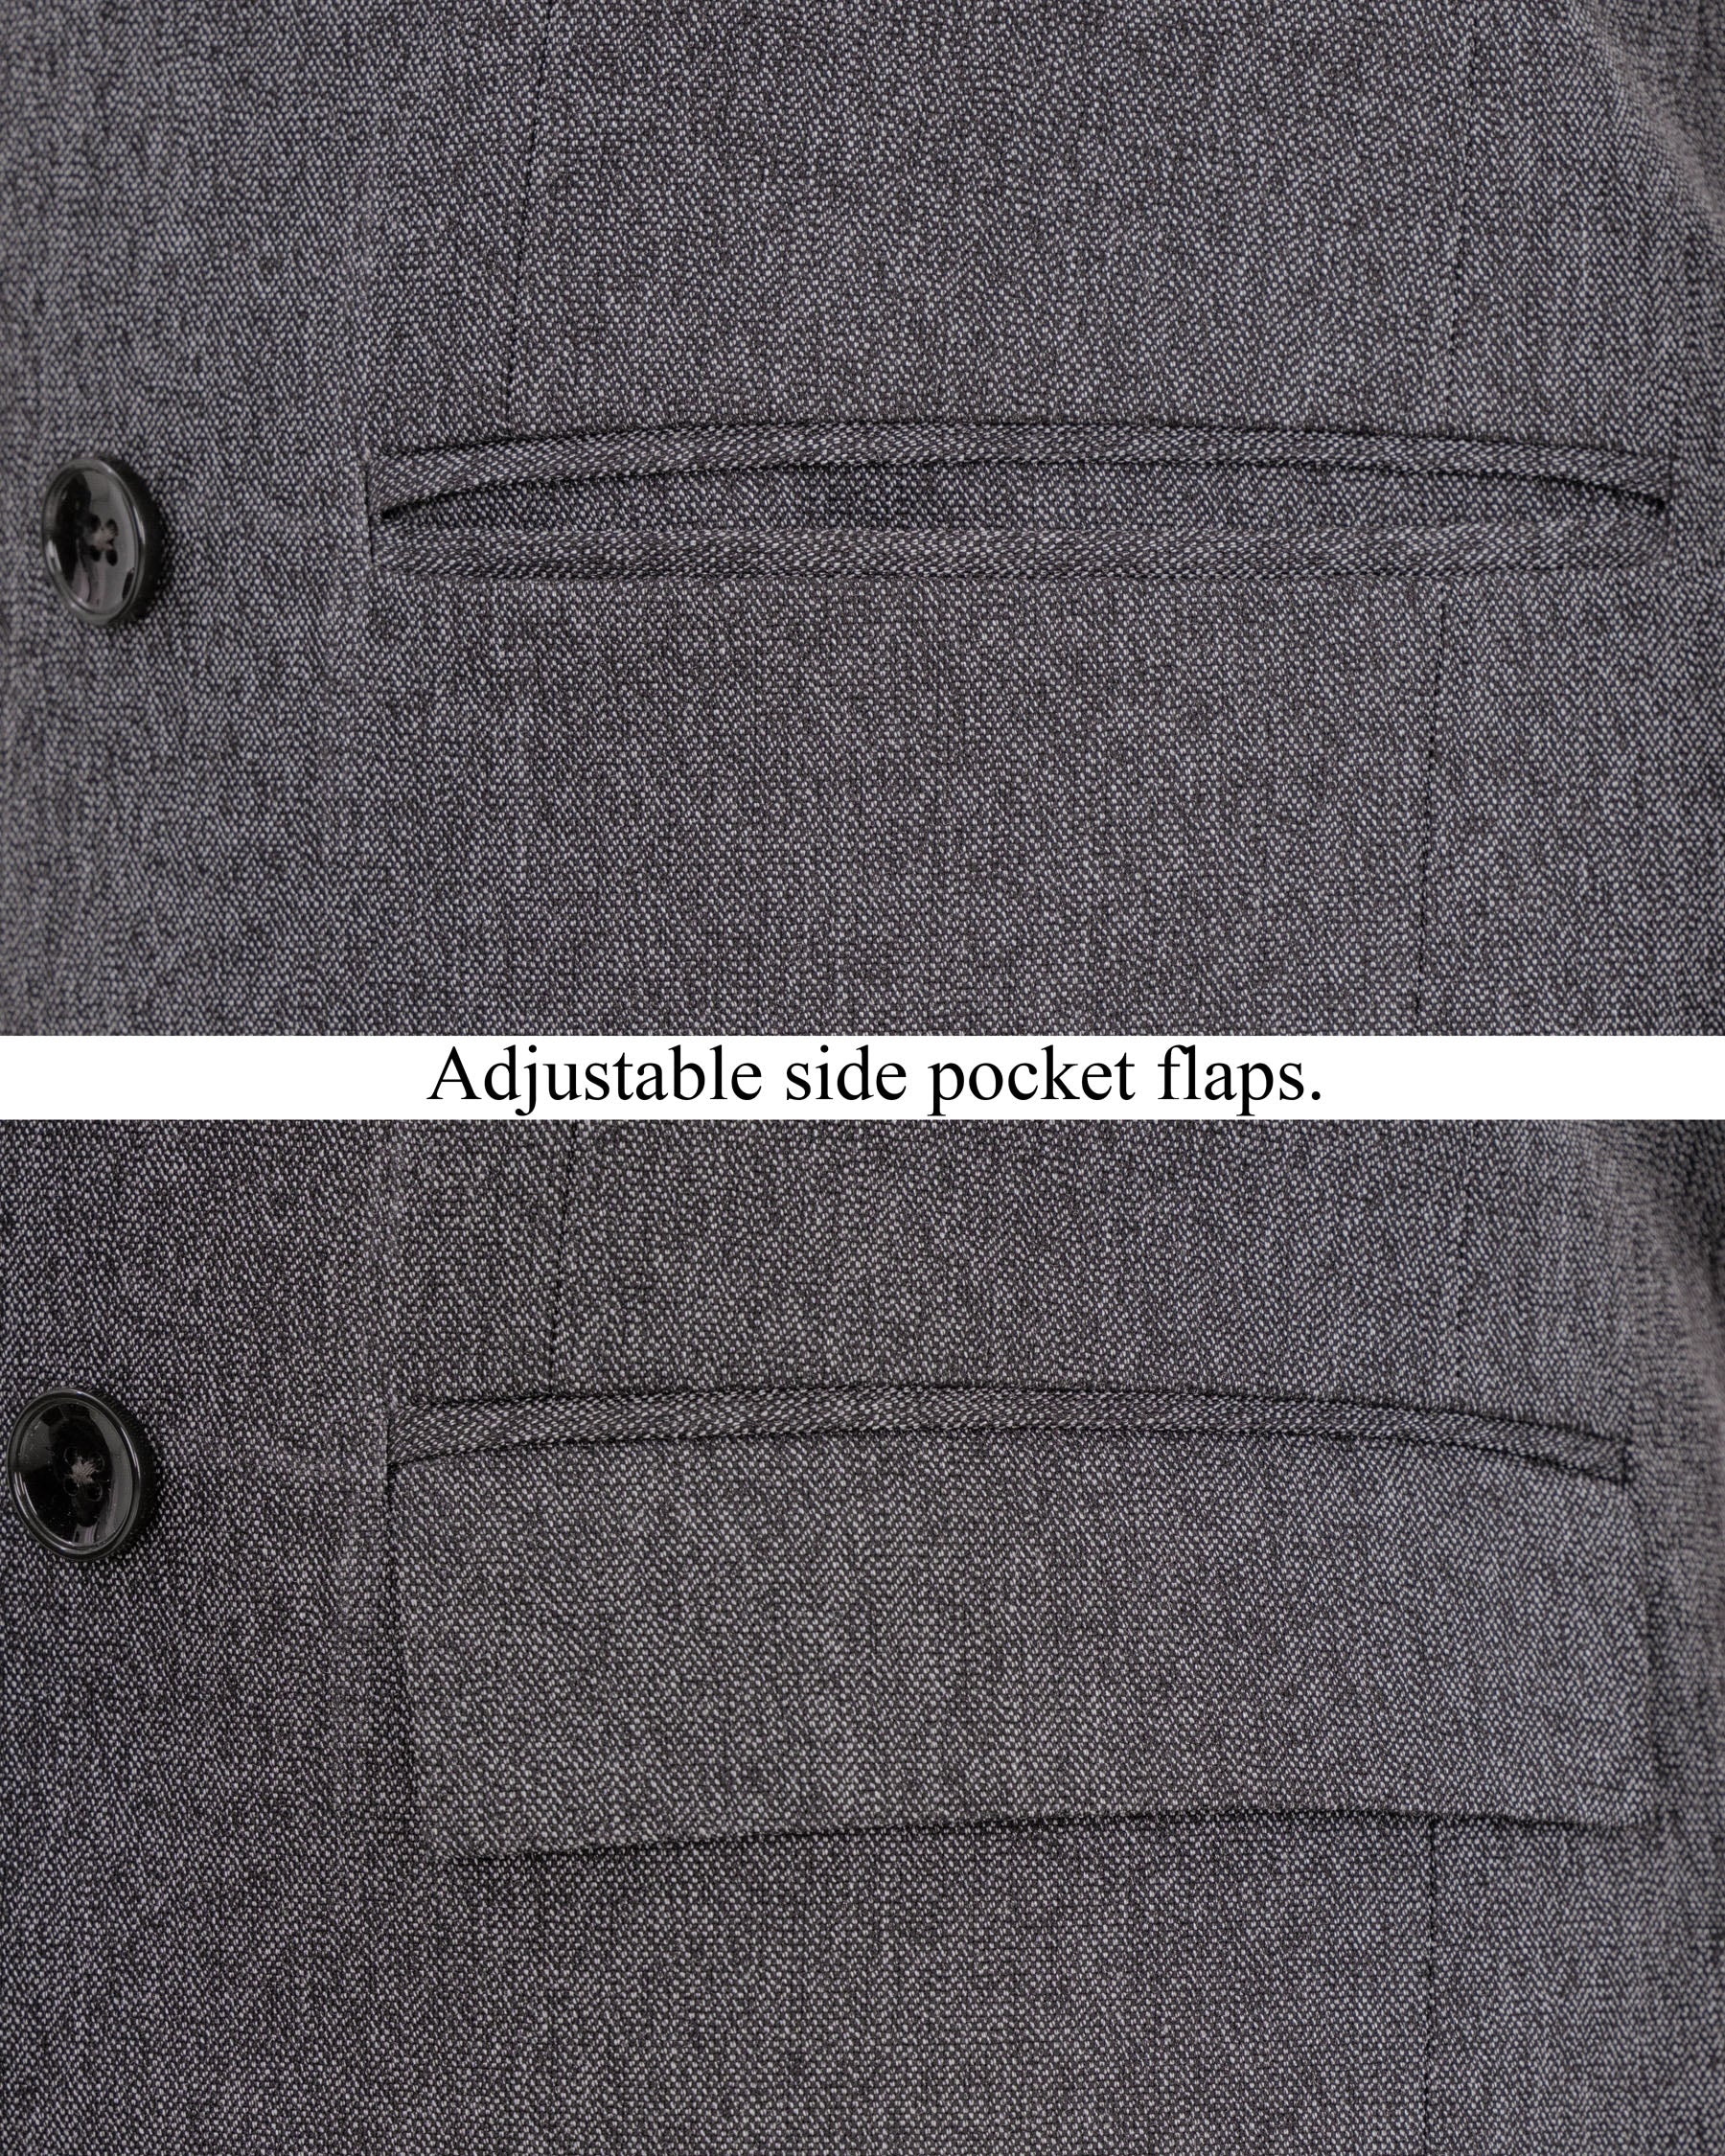 Mobster Grey Double-Breasted Premium Cotton Blazer BL1451-DB-36,BL1451-DB-38,BL1451-DB-40,BL1451-DB-42,BL1451-DB-44,BL1451-DB-46,BL1451-DB-48,BL1451-DB-50,BL1451-DB-52,BL1451-DB-54,BL1451-DB-56,BL1451-DB-58,BL1451-DB-60